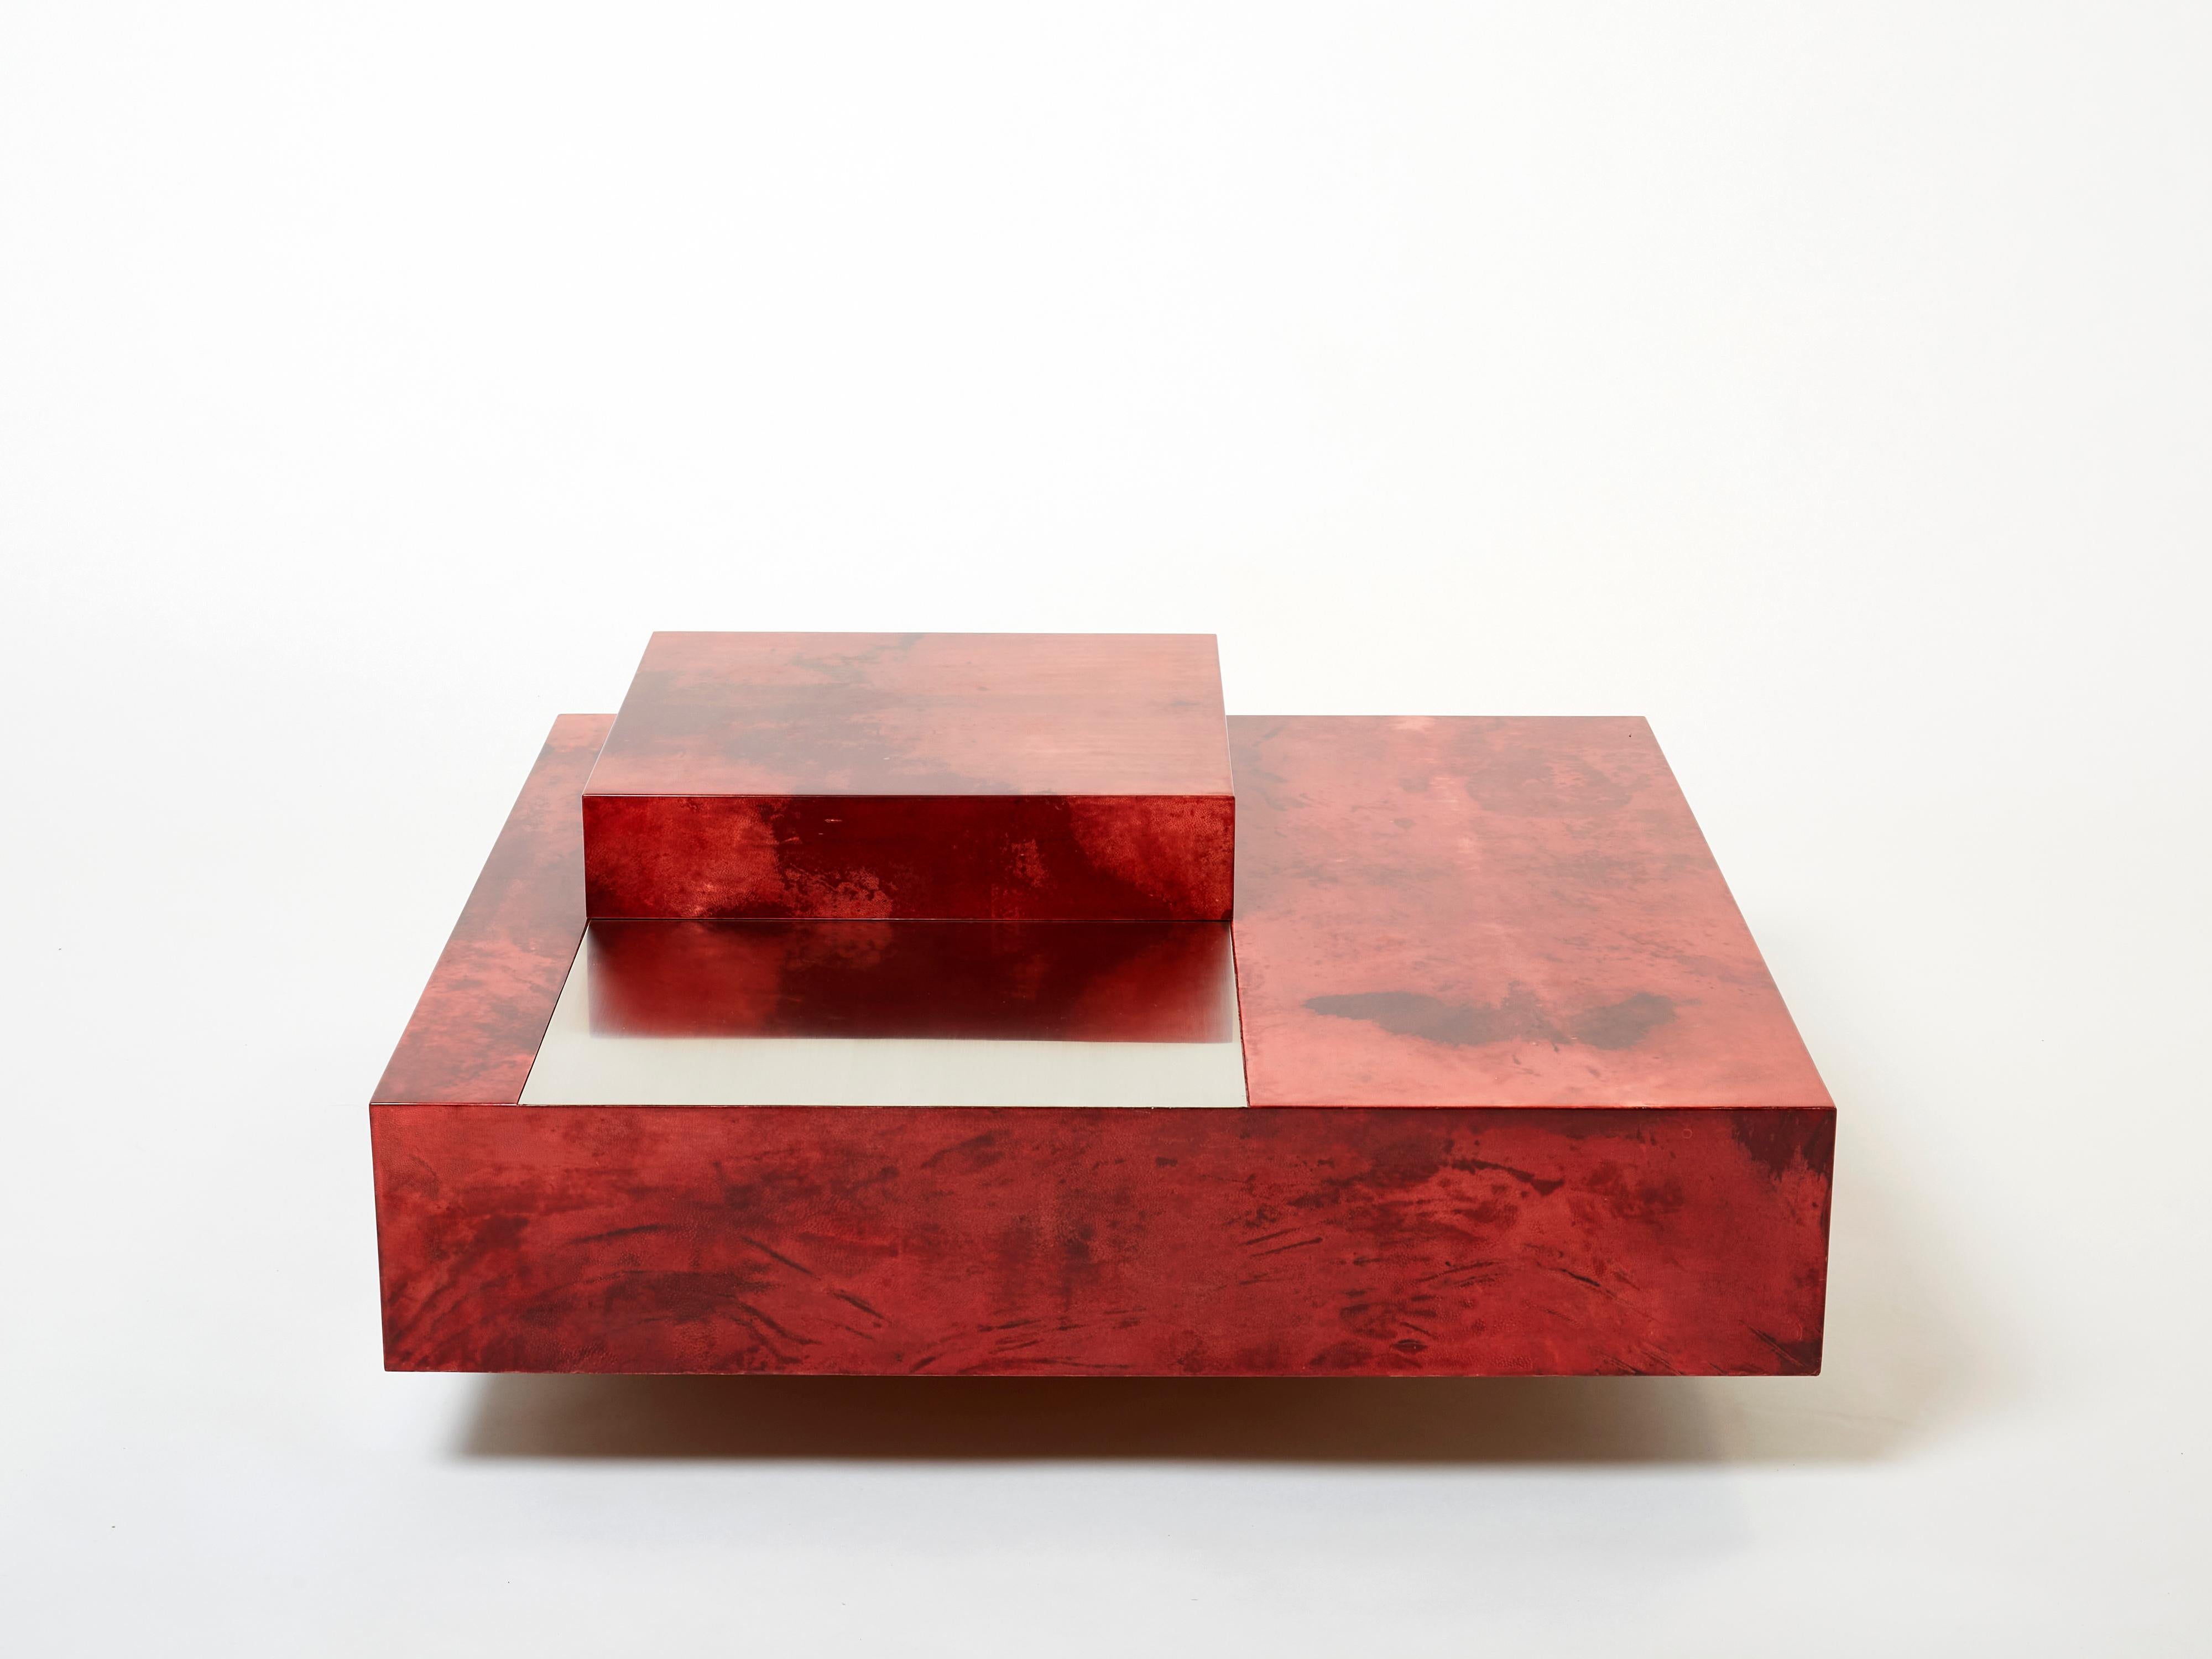 The varnished goatskin parchment, in rich shades of light cherry red, makes this coffee table typical of designer Aldo Tura. This large square piece would make a fascinating centerpiece for any living room. It’s been beautifully finished for a